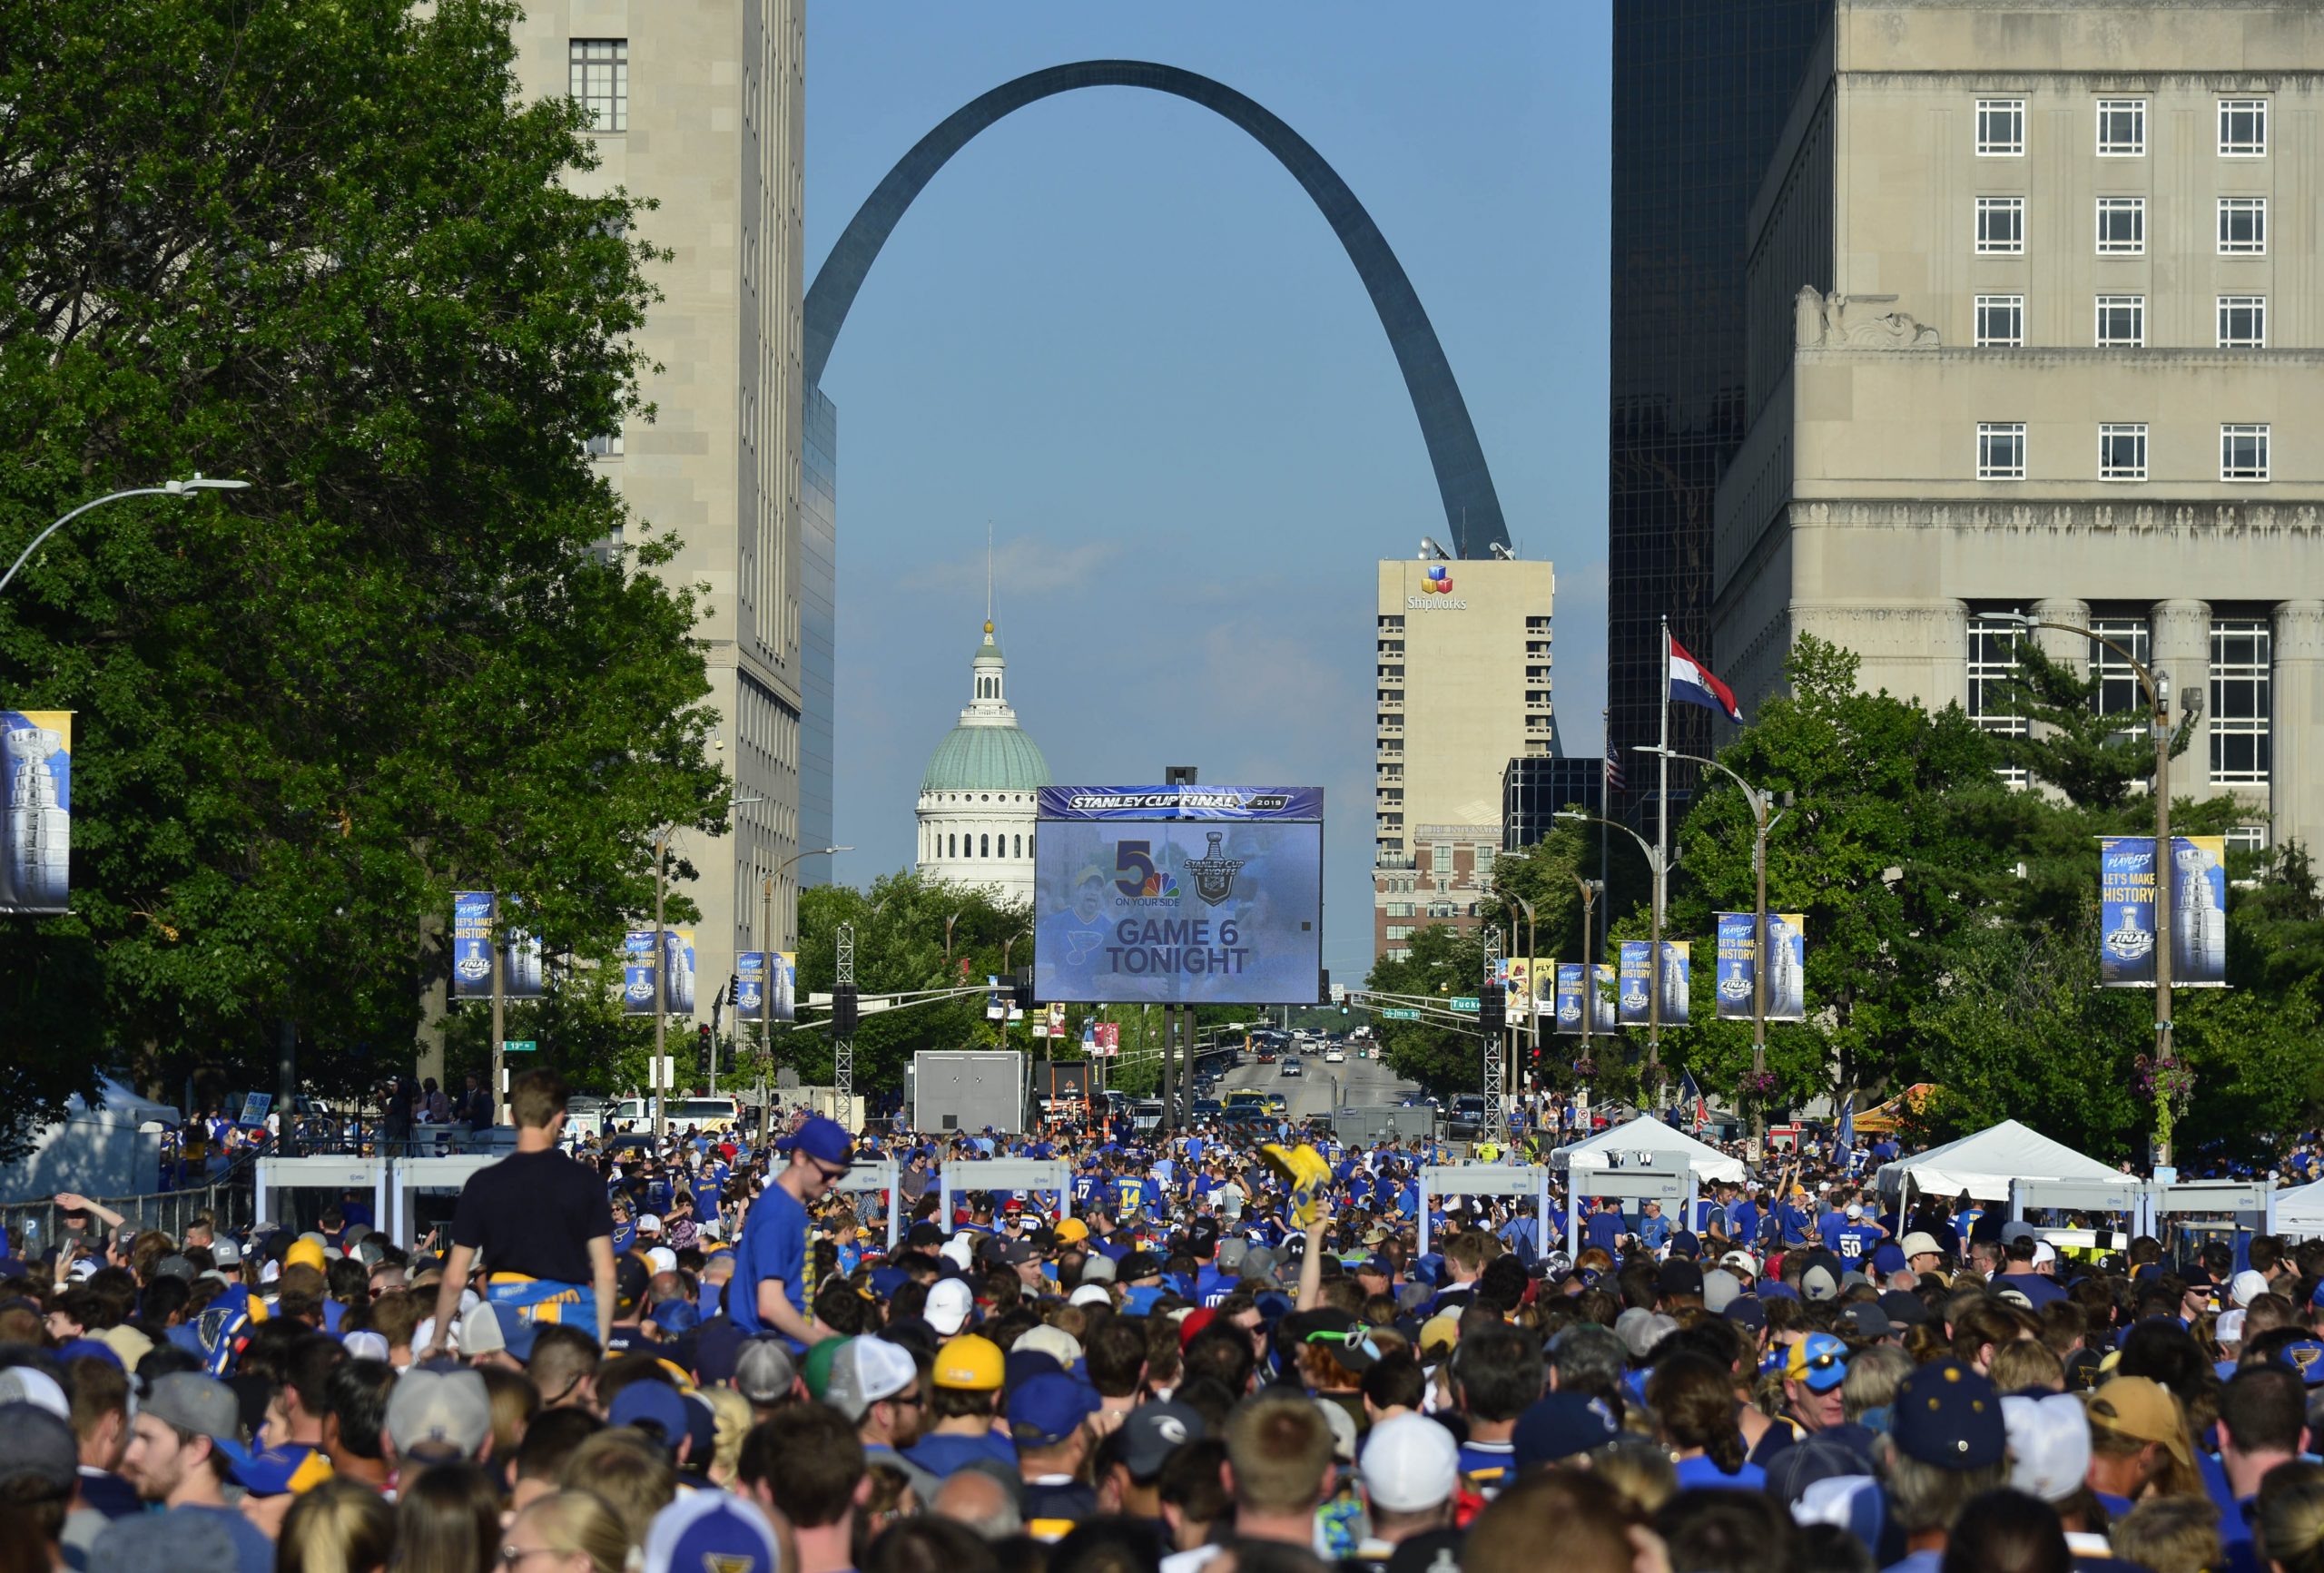 NHL: Stanley Cup Final-Boston Bruins at St. Louis Blues